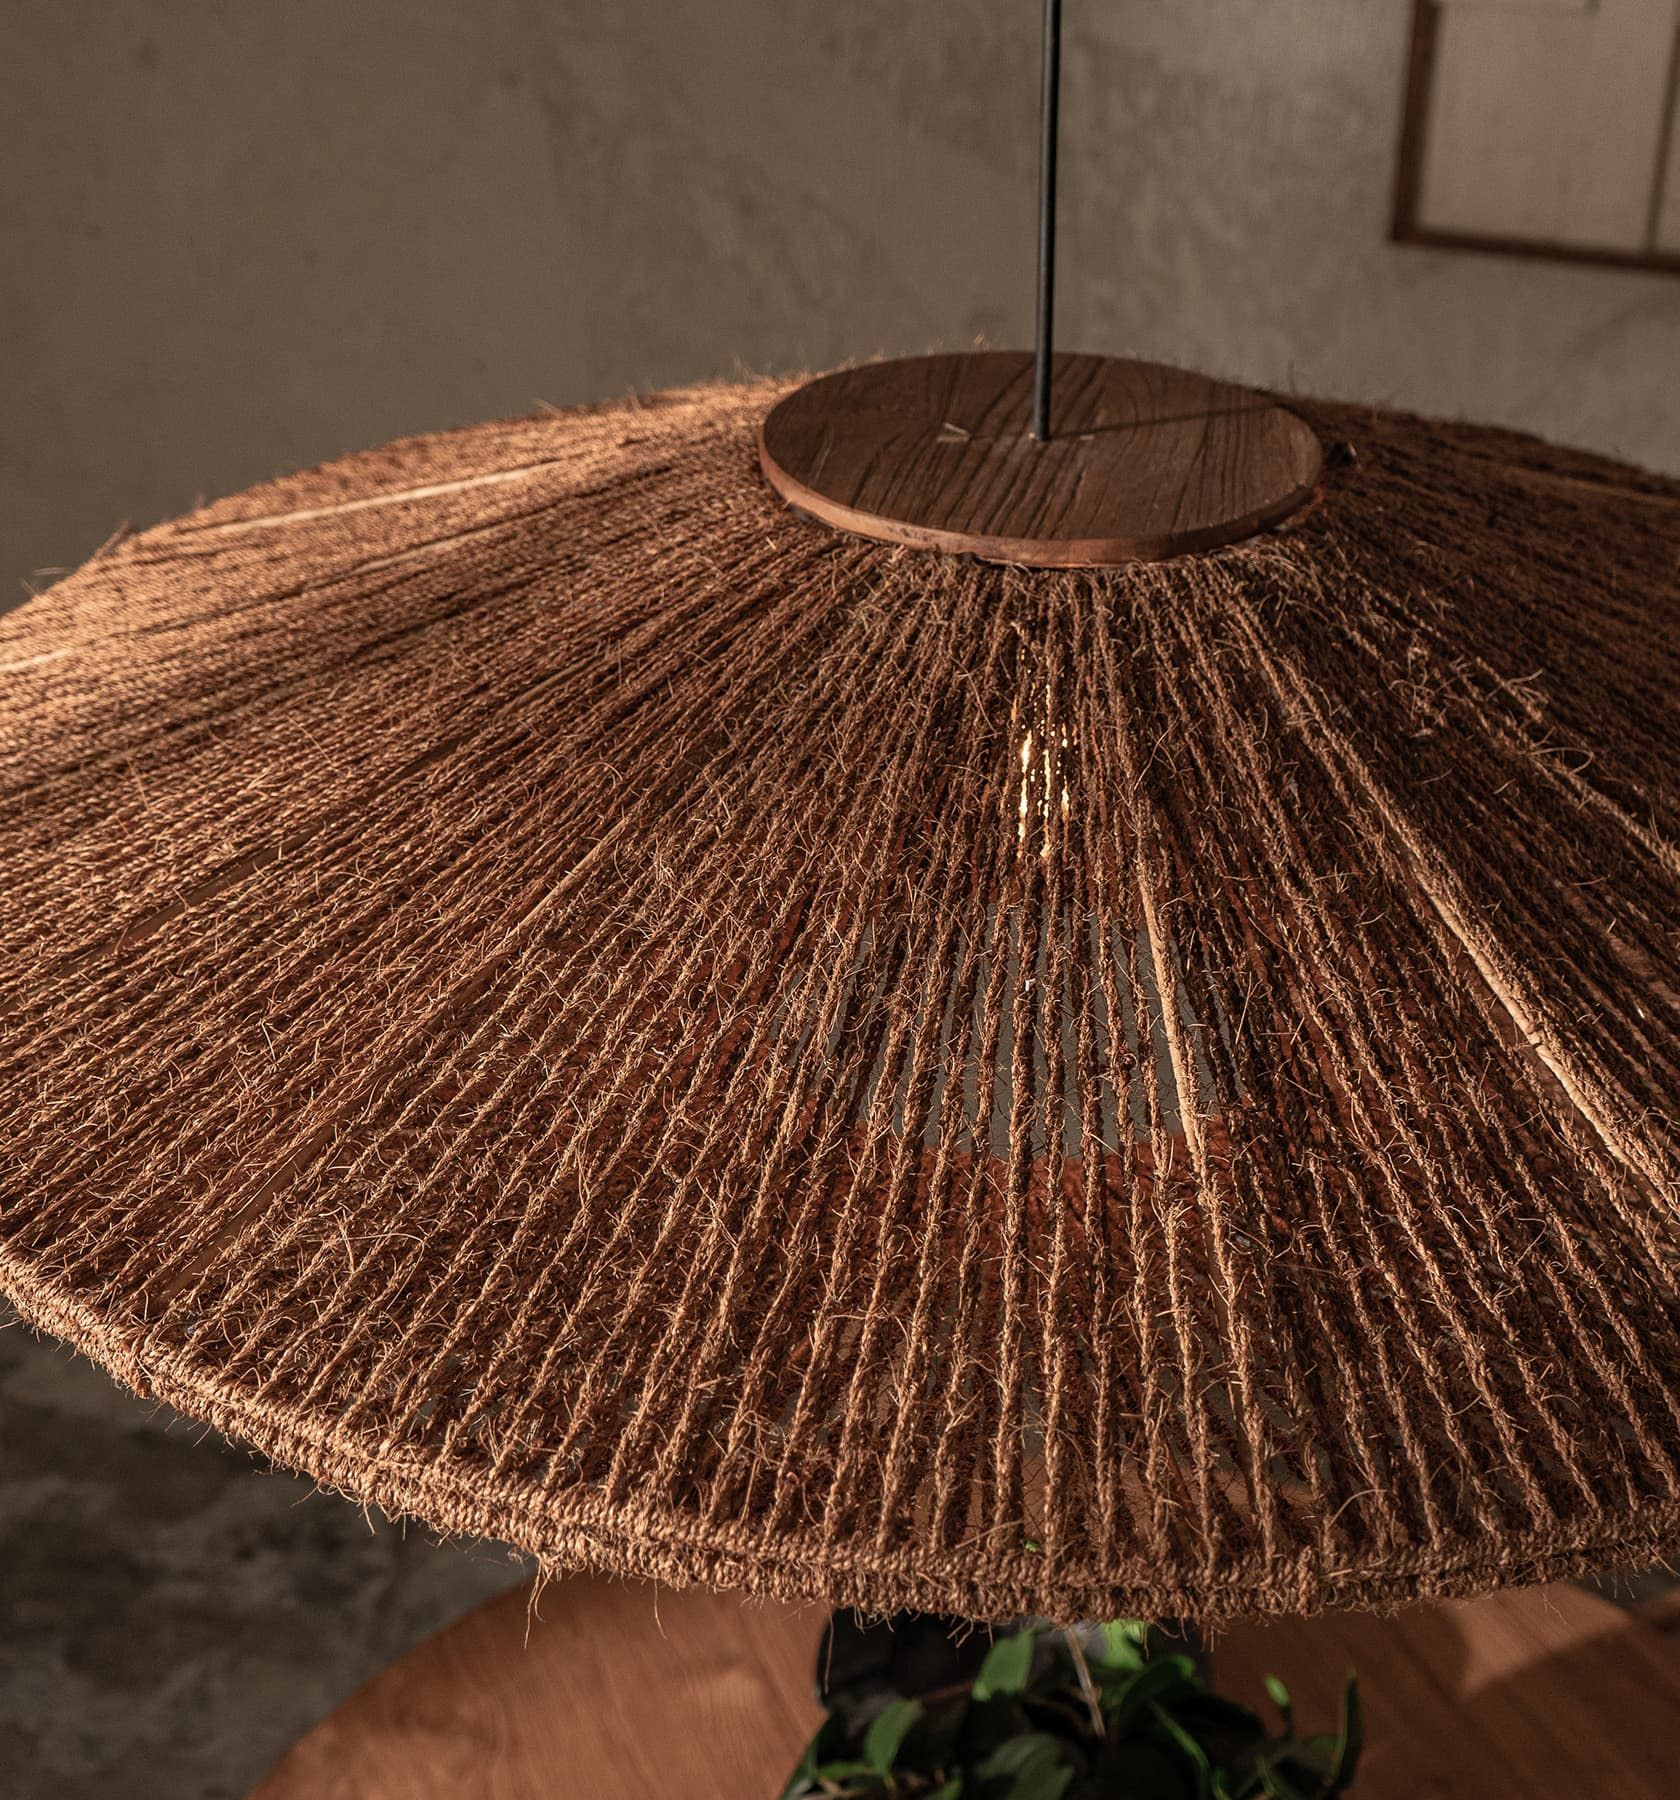 COCO by DBODHI Pendant lamp